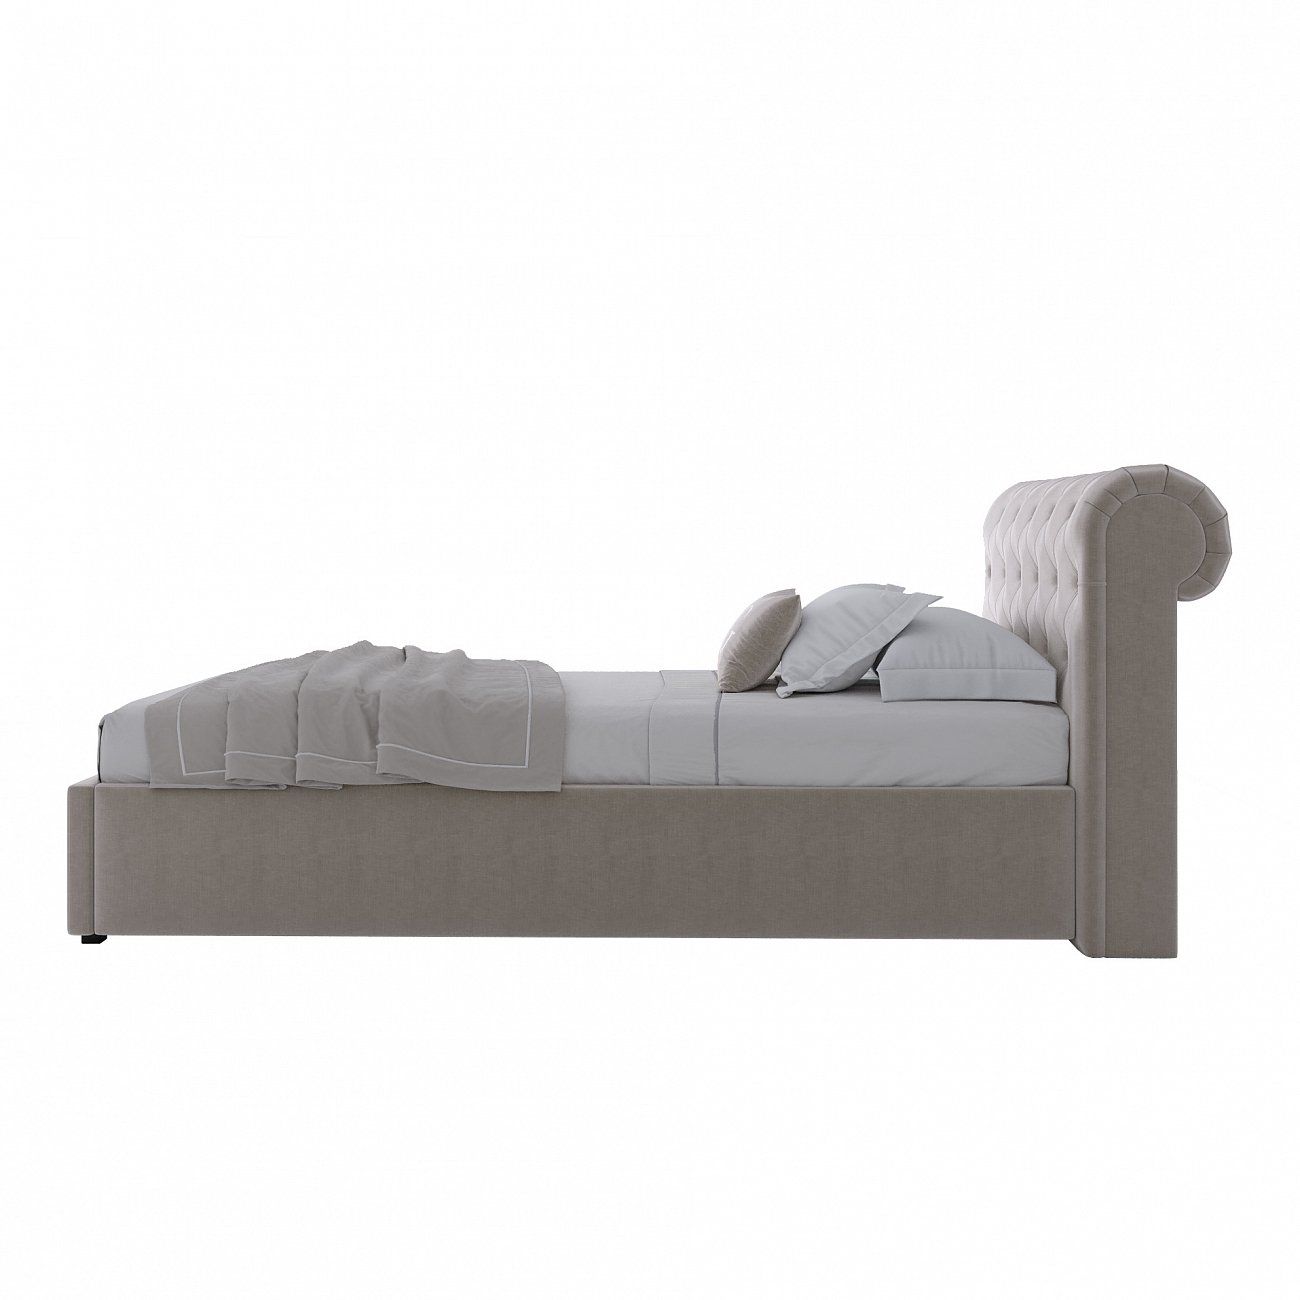 Single bed with upholstered headboard 90x200 cm light beige Sweet Dreams